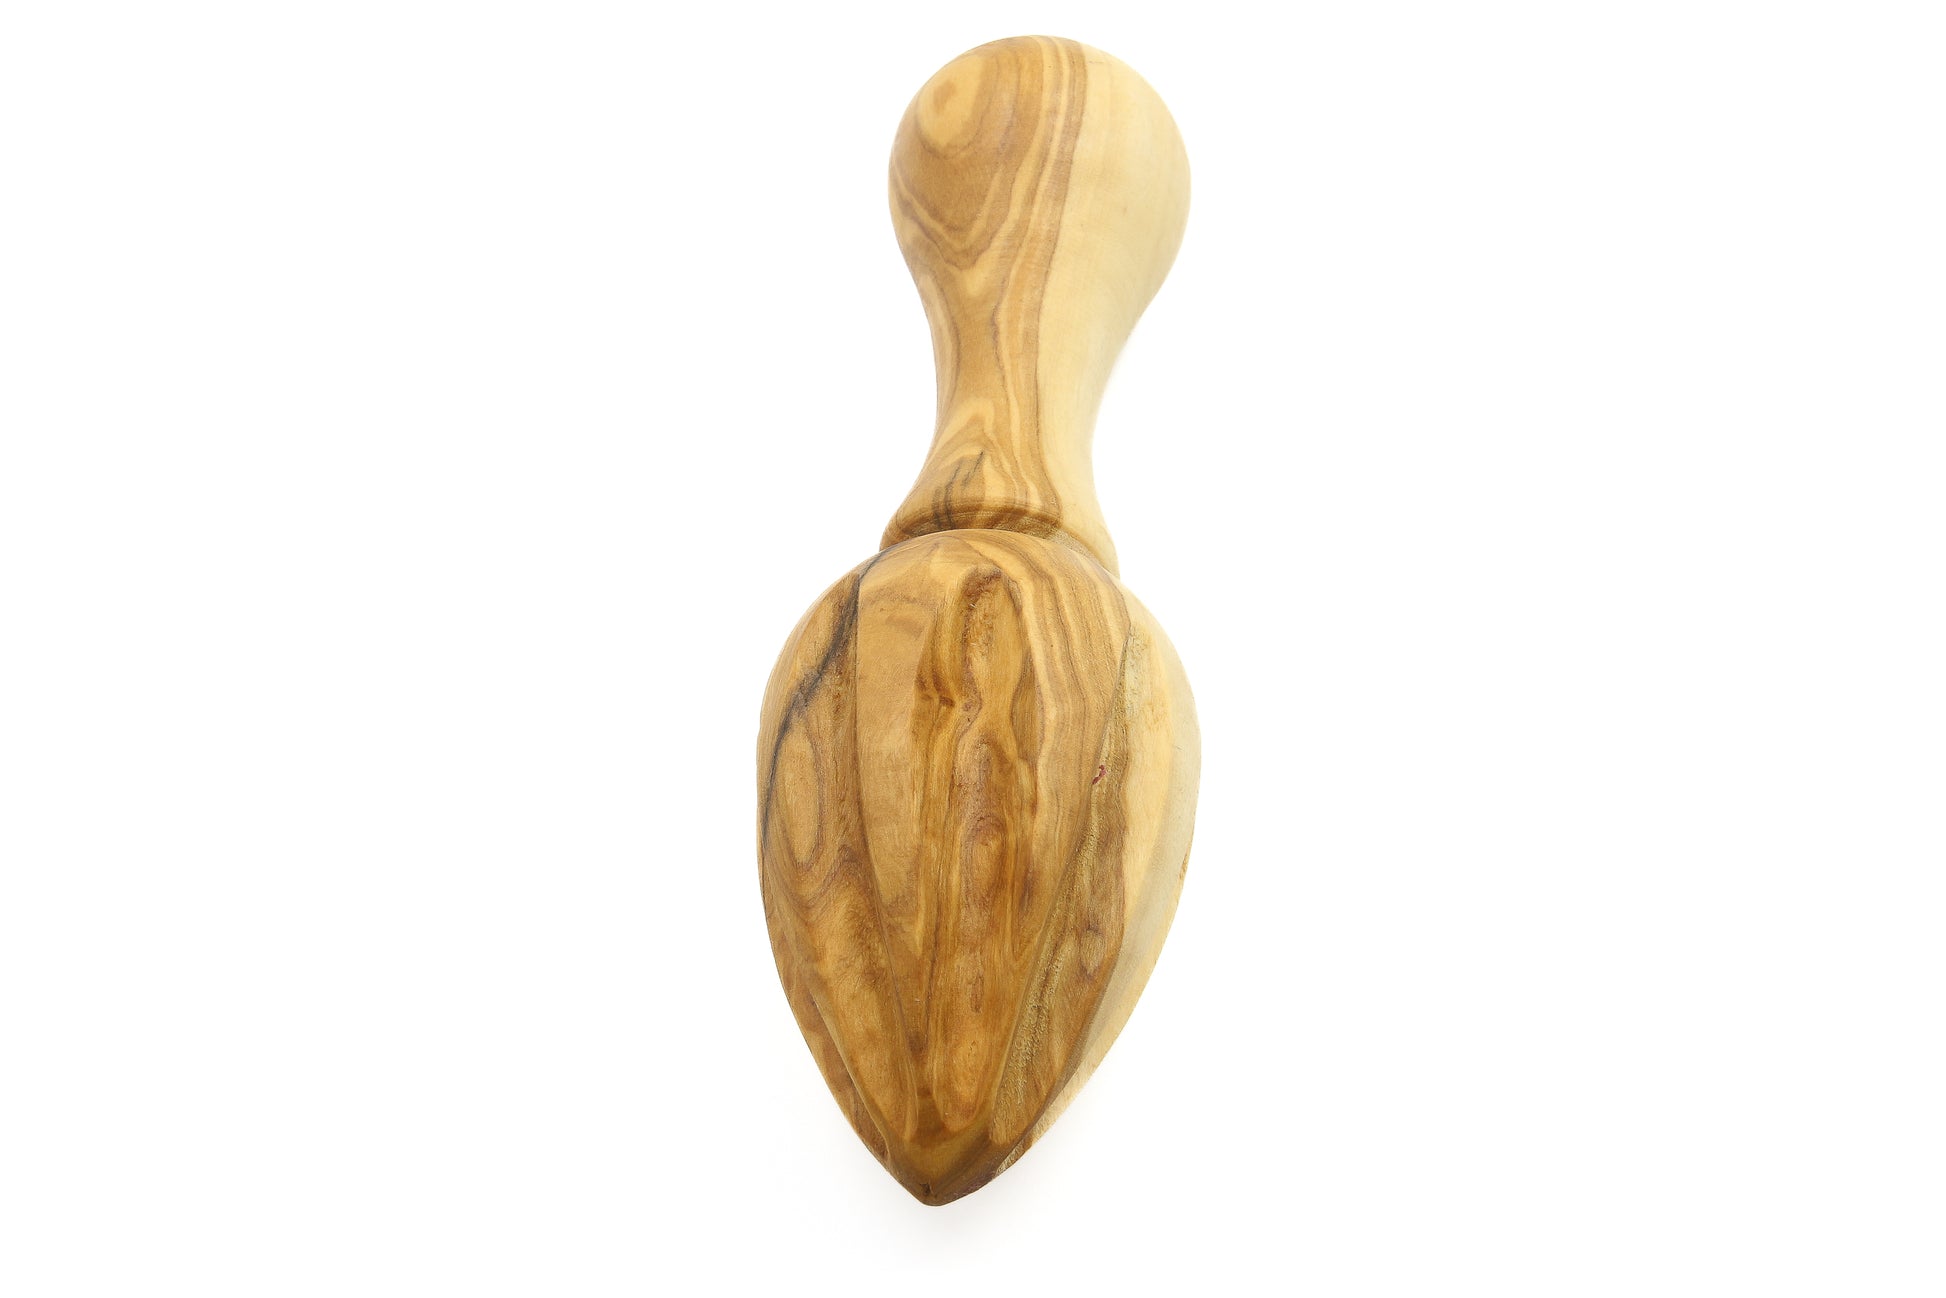 Artisan-made vintage-style squeezer in beautiful olive wood